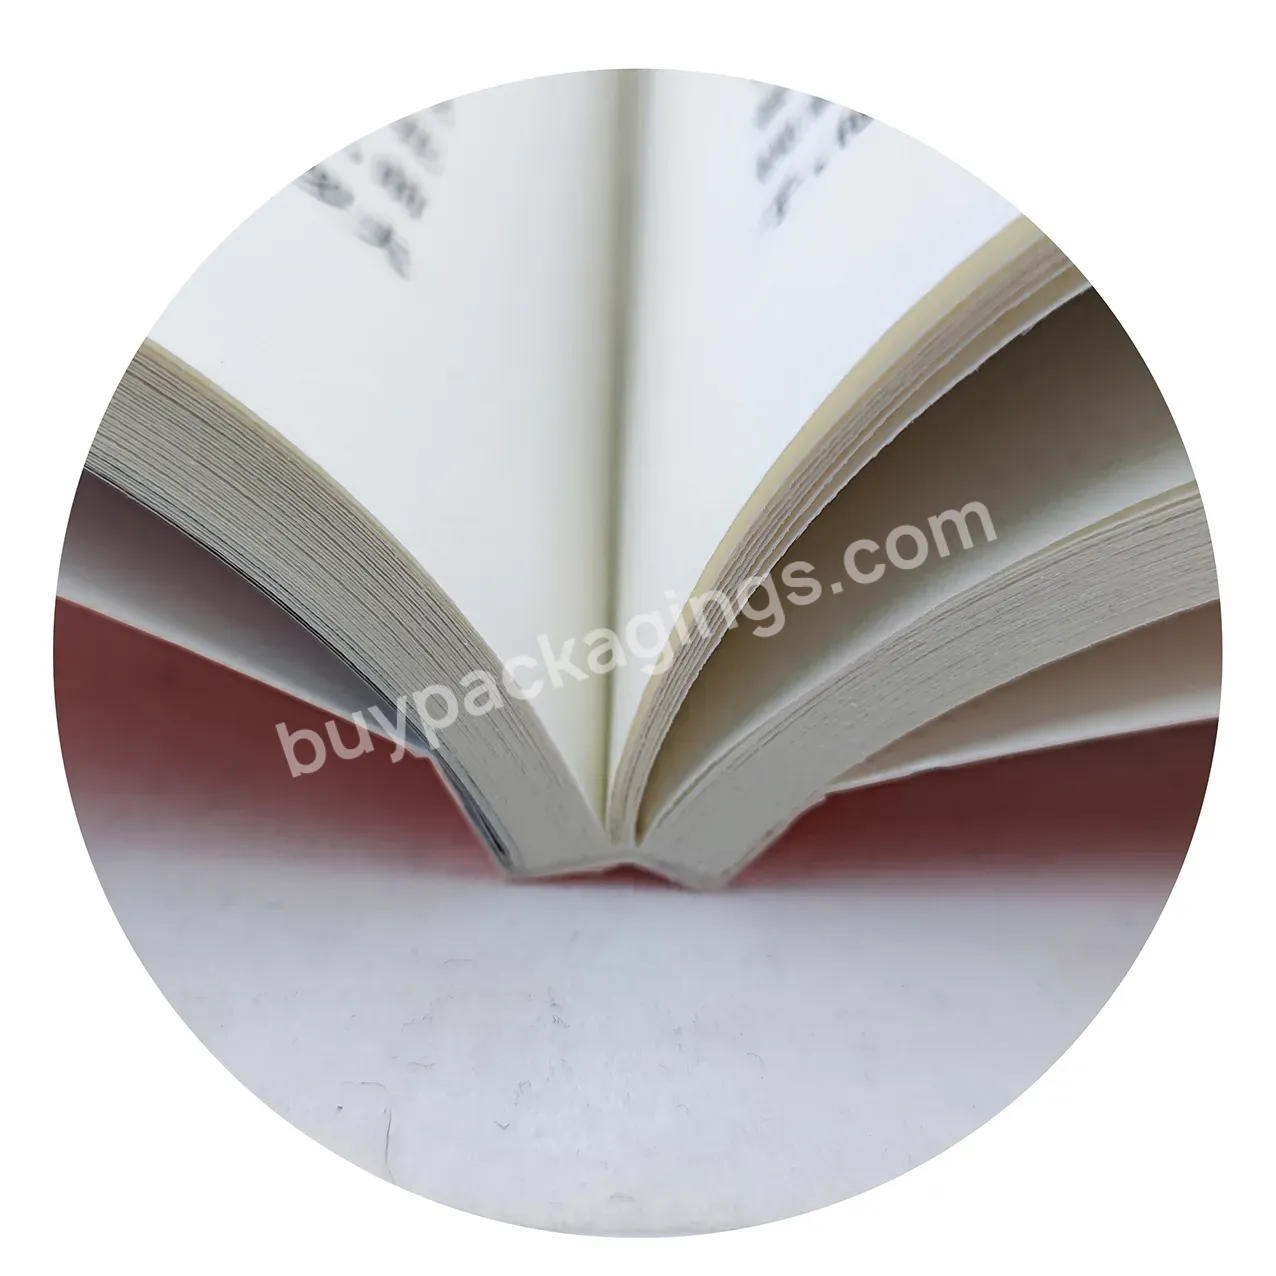 Wholesale Cheap Custom Softcover Printing Offset Publishing Paperback Adult Comic Story Books Journal Magazine Printing - Buy Book Printing Softcover Children Book Printing,Offset Publishing Books Journal Printing Service,Paperback Adult Comic Story